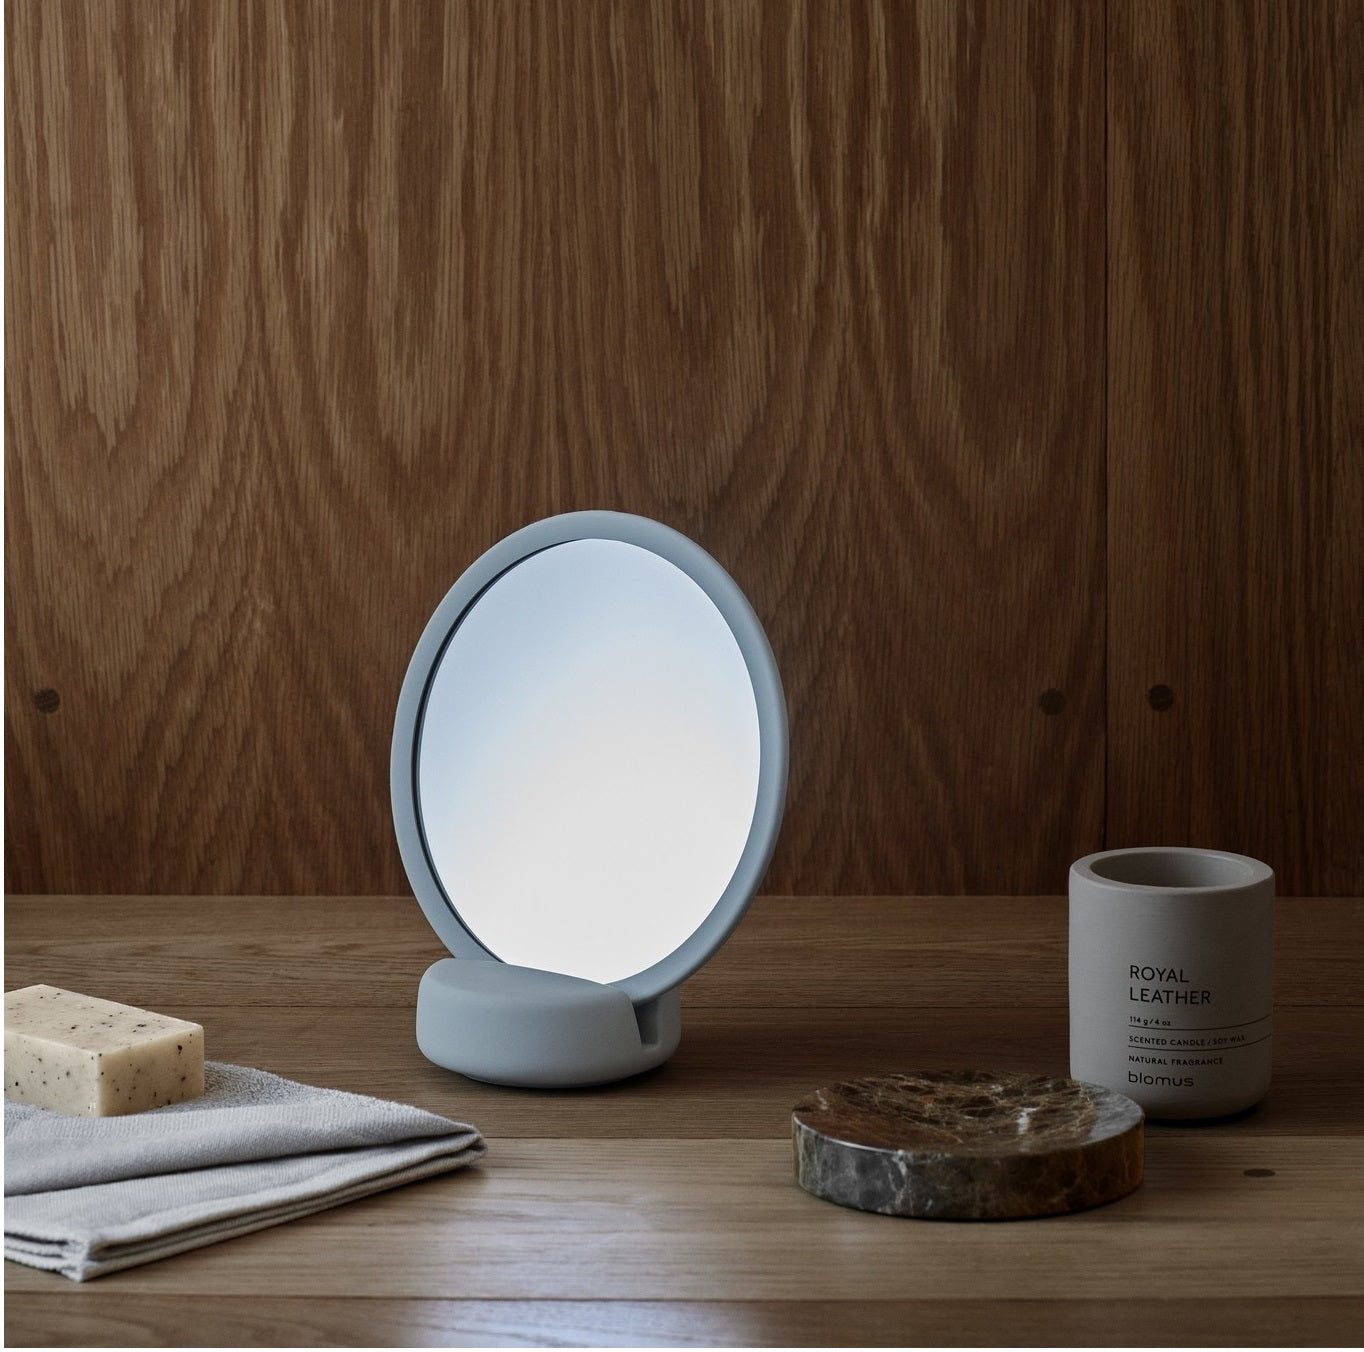 Blomus SONO Cosmetic Mirror with 5x Magnification and Removable Base - Moonbeam